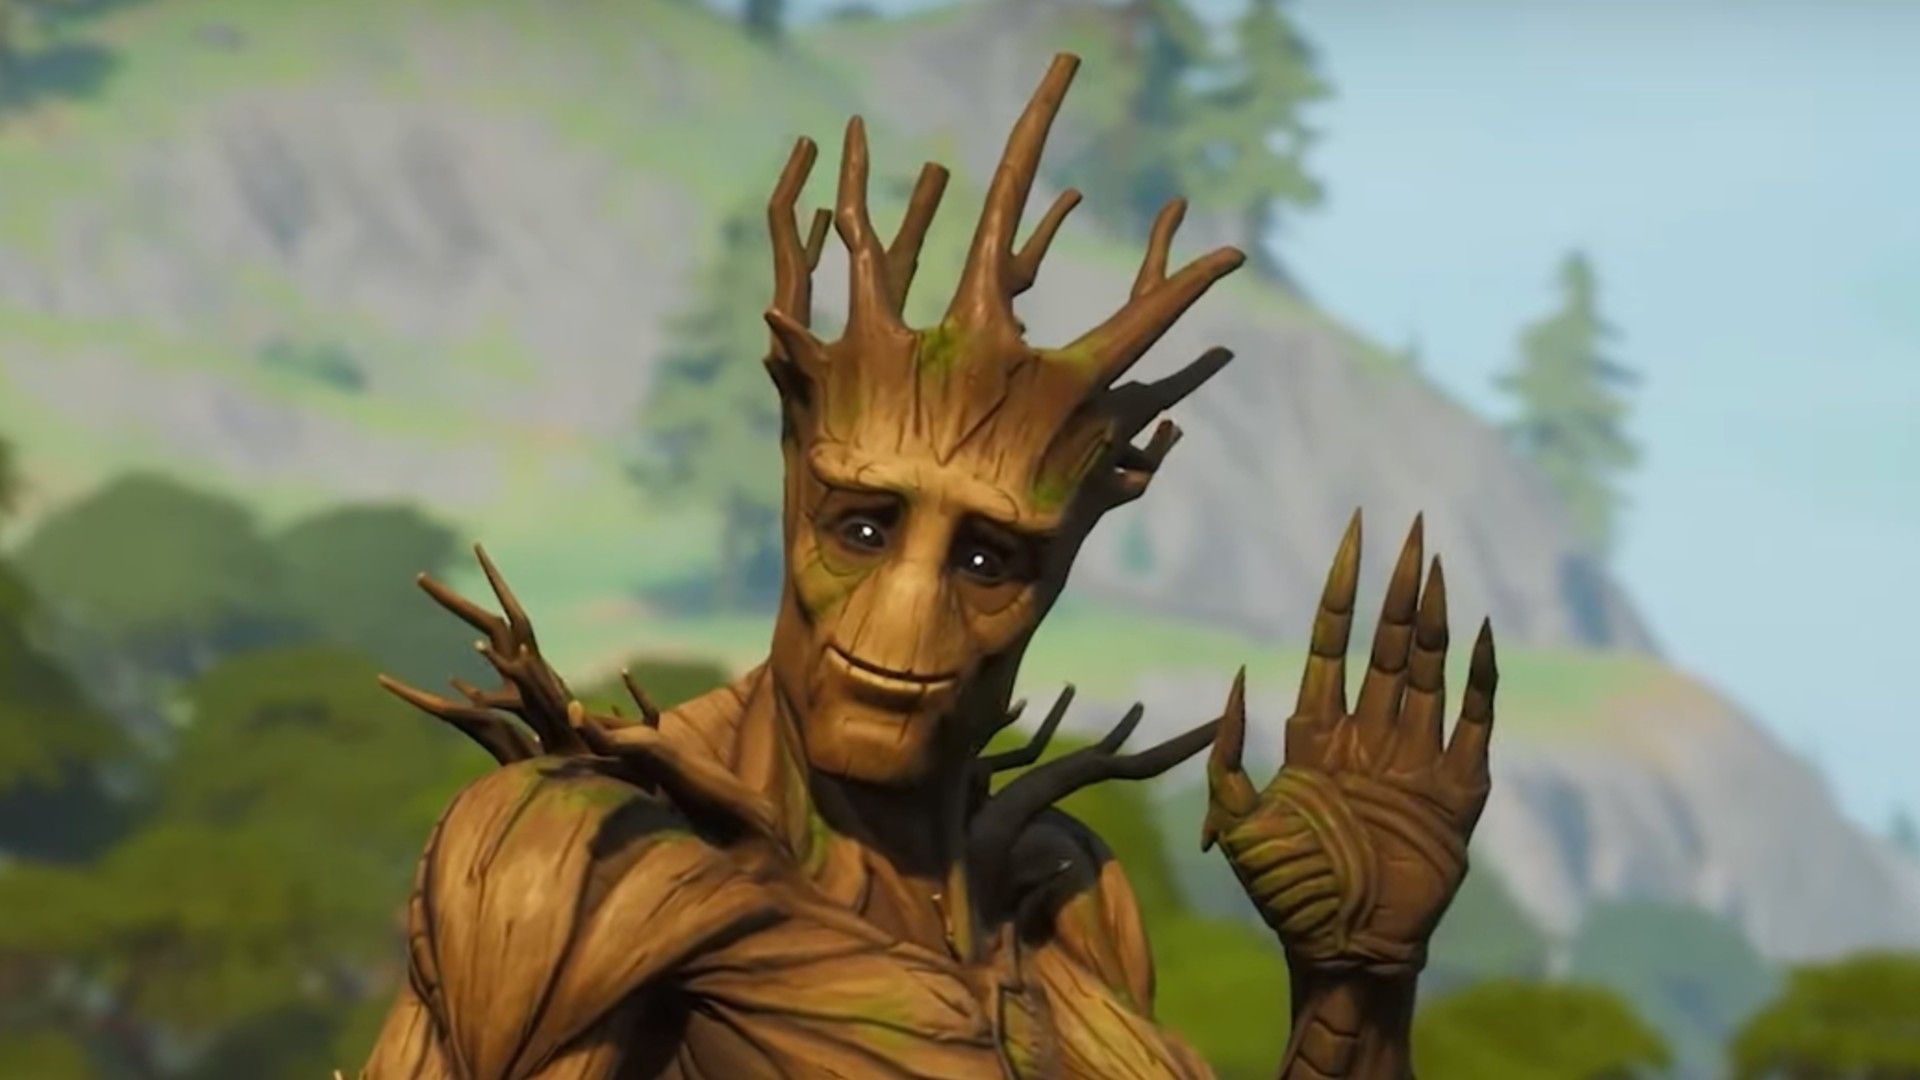 Groot Awakening Challenges guide: How to get the Rocket emote in Fortnite